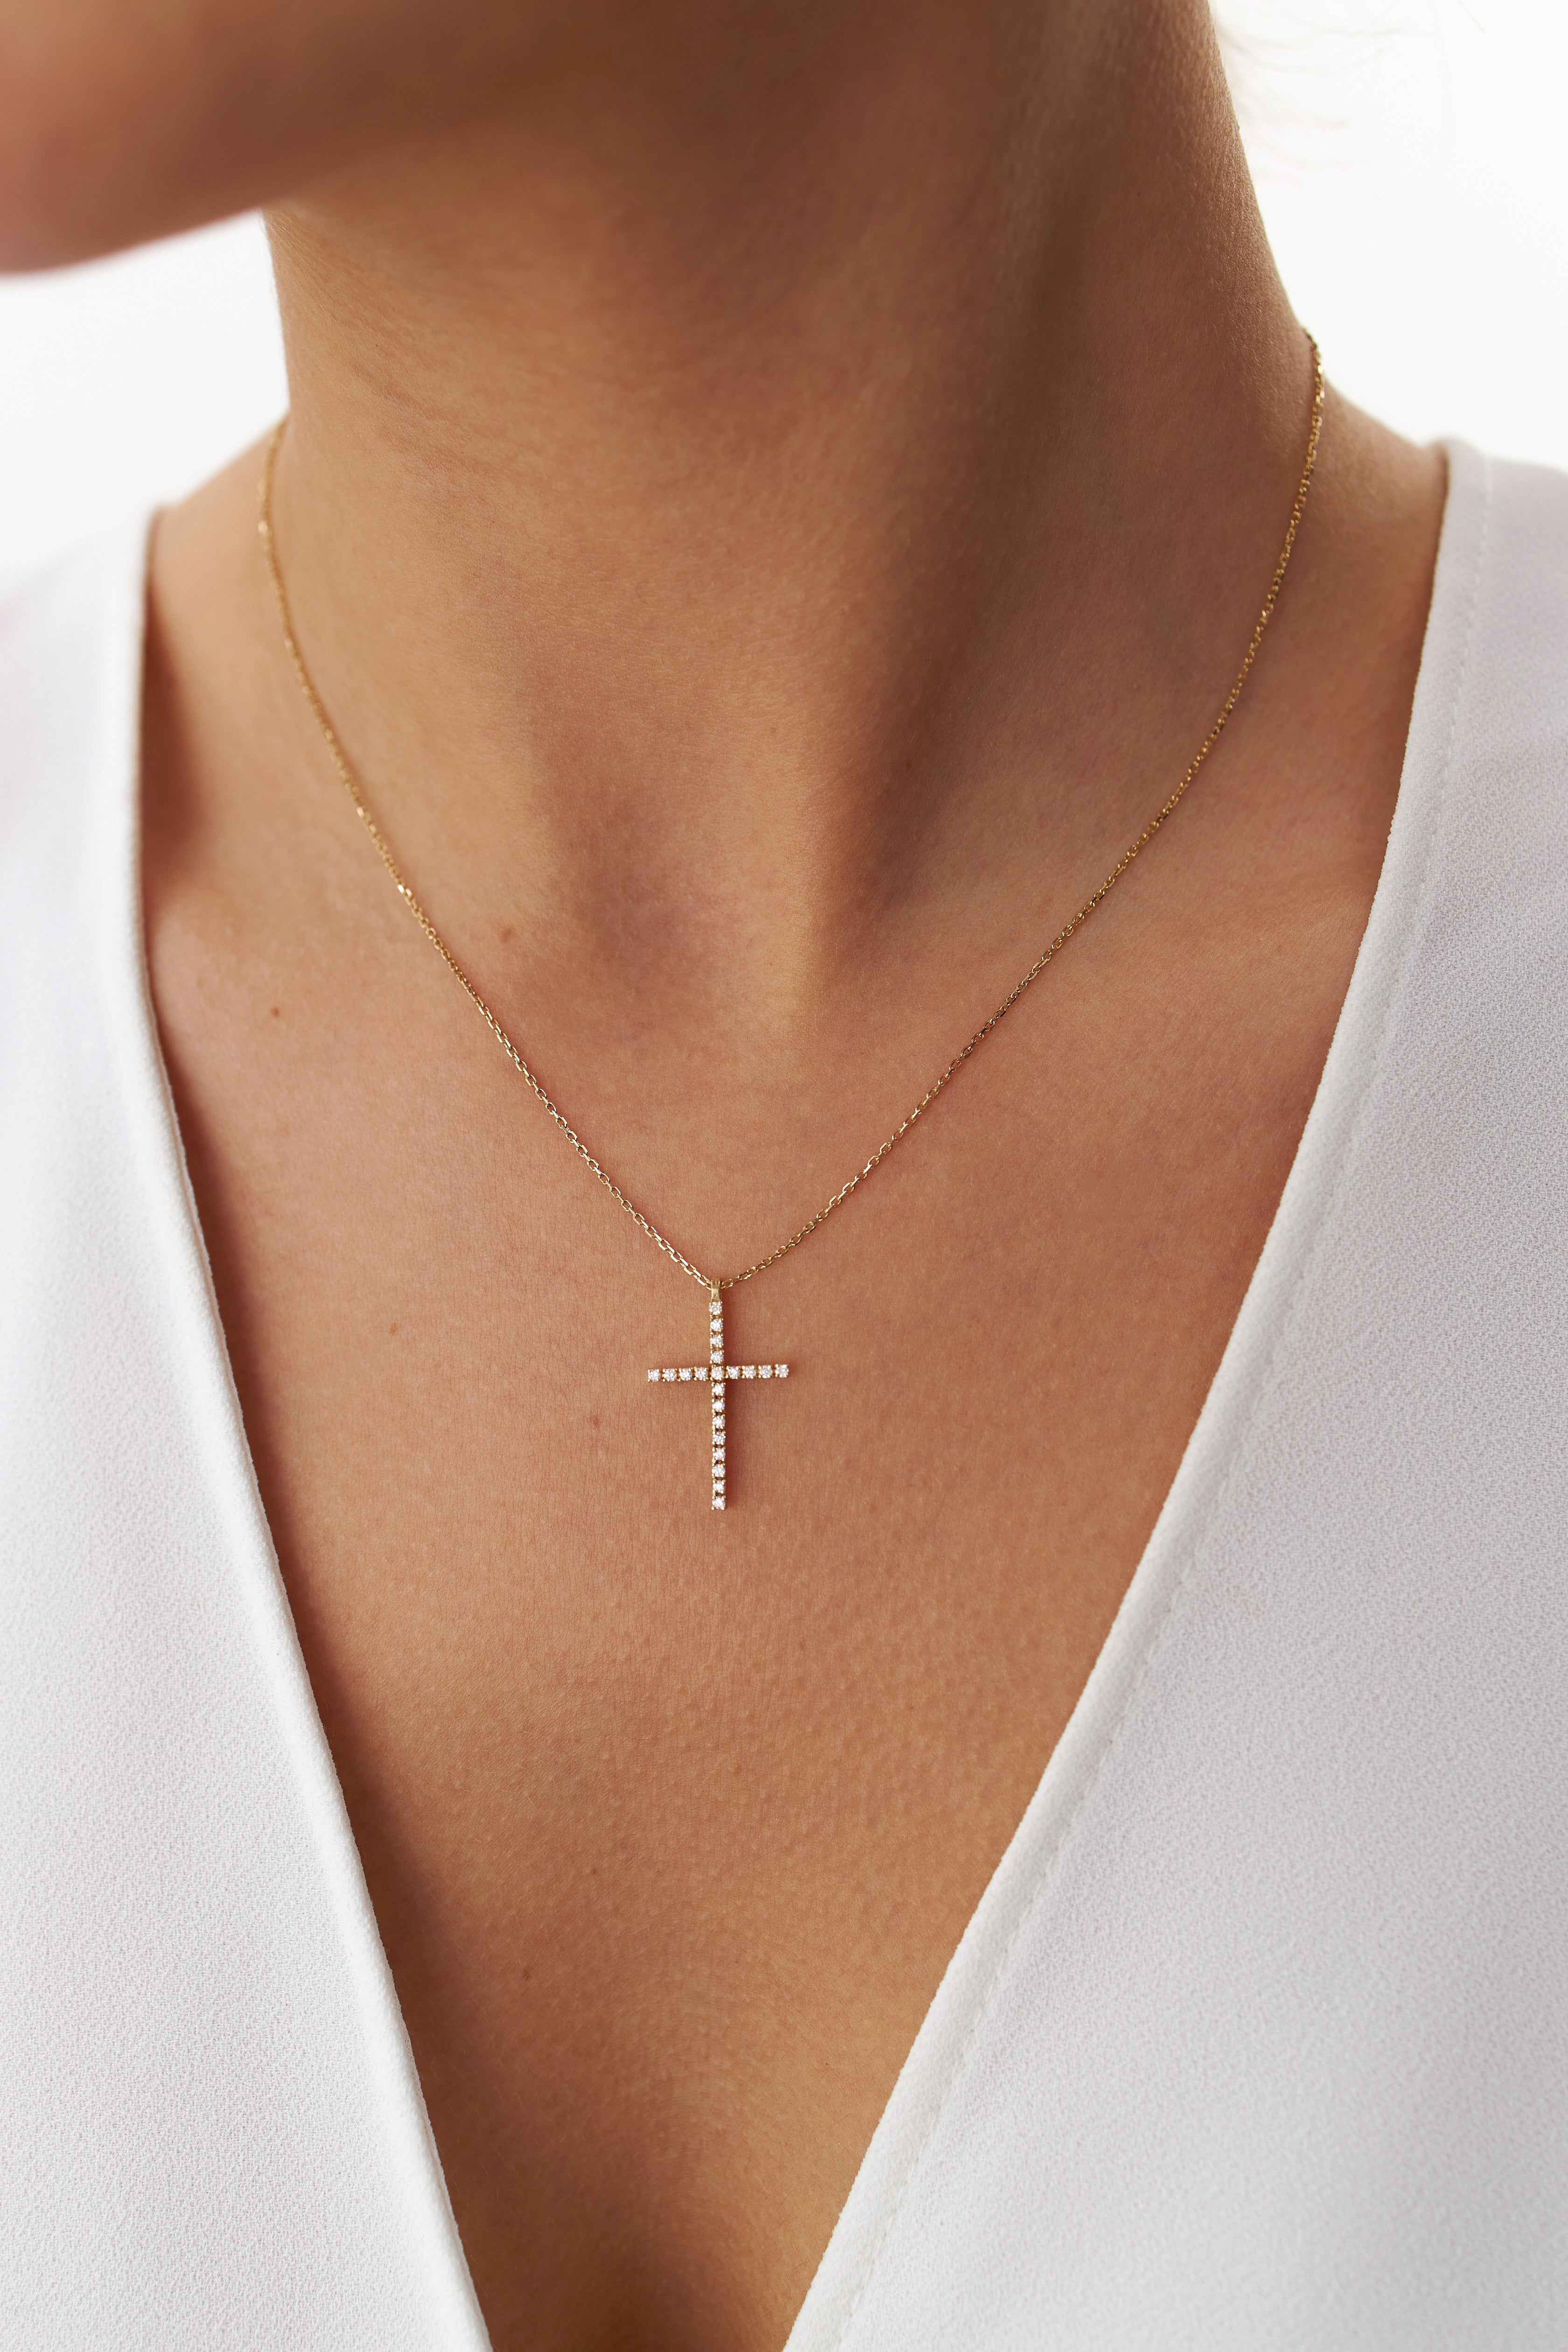 Diamond Cross Necklace Available in 14K and 18K Gold